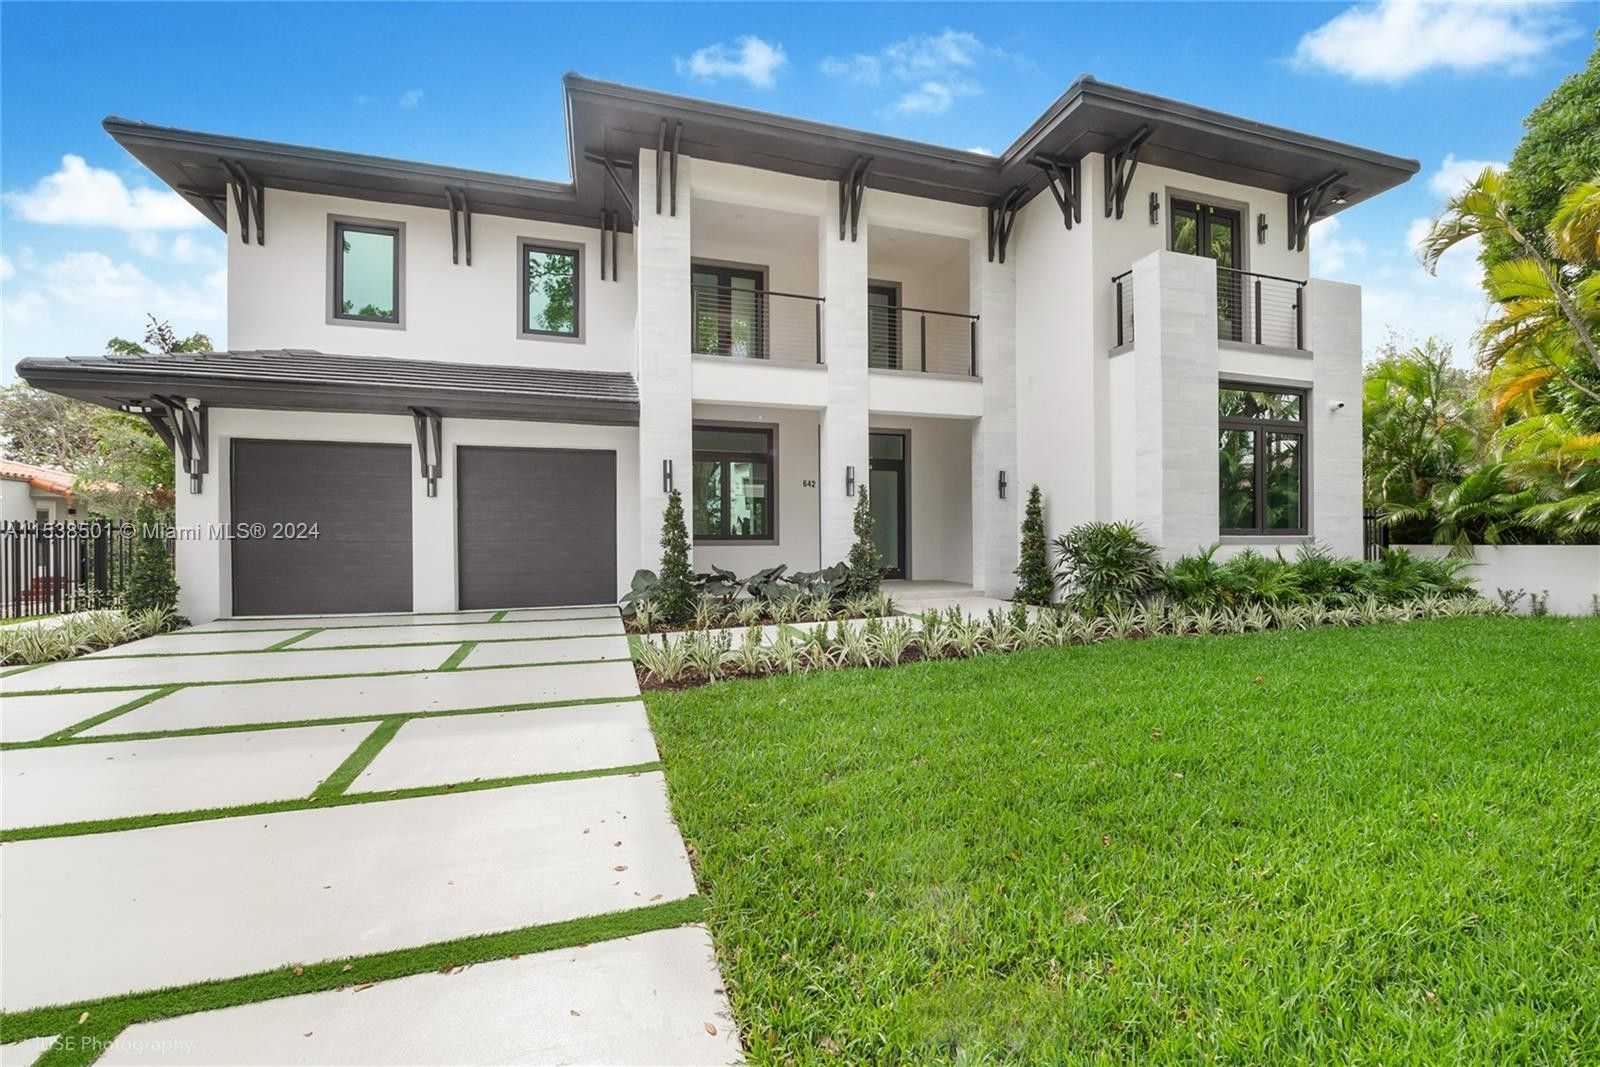 642 Madeira Ave. Coral Gables, FL 33134